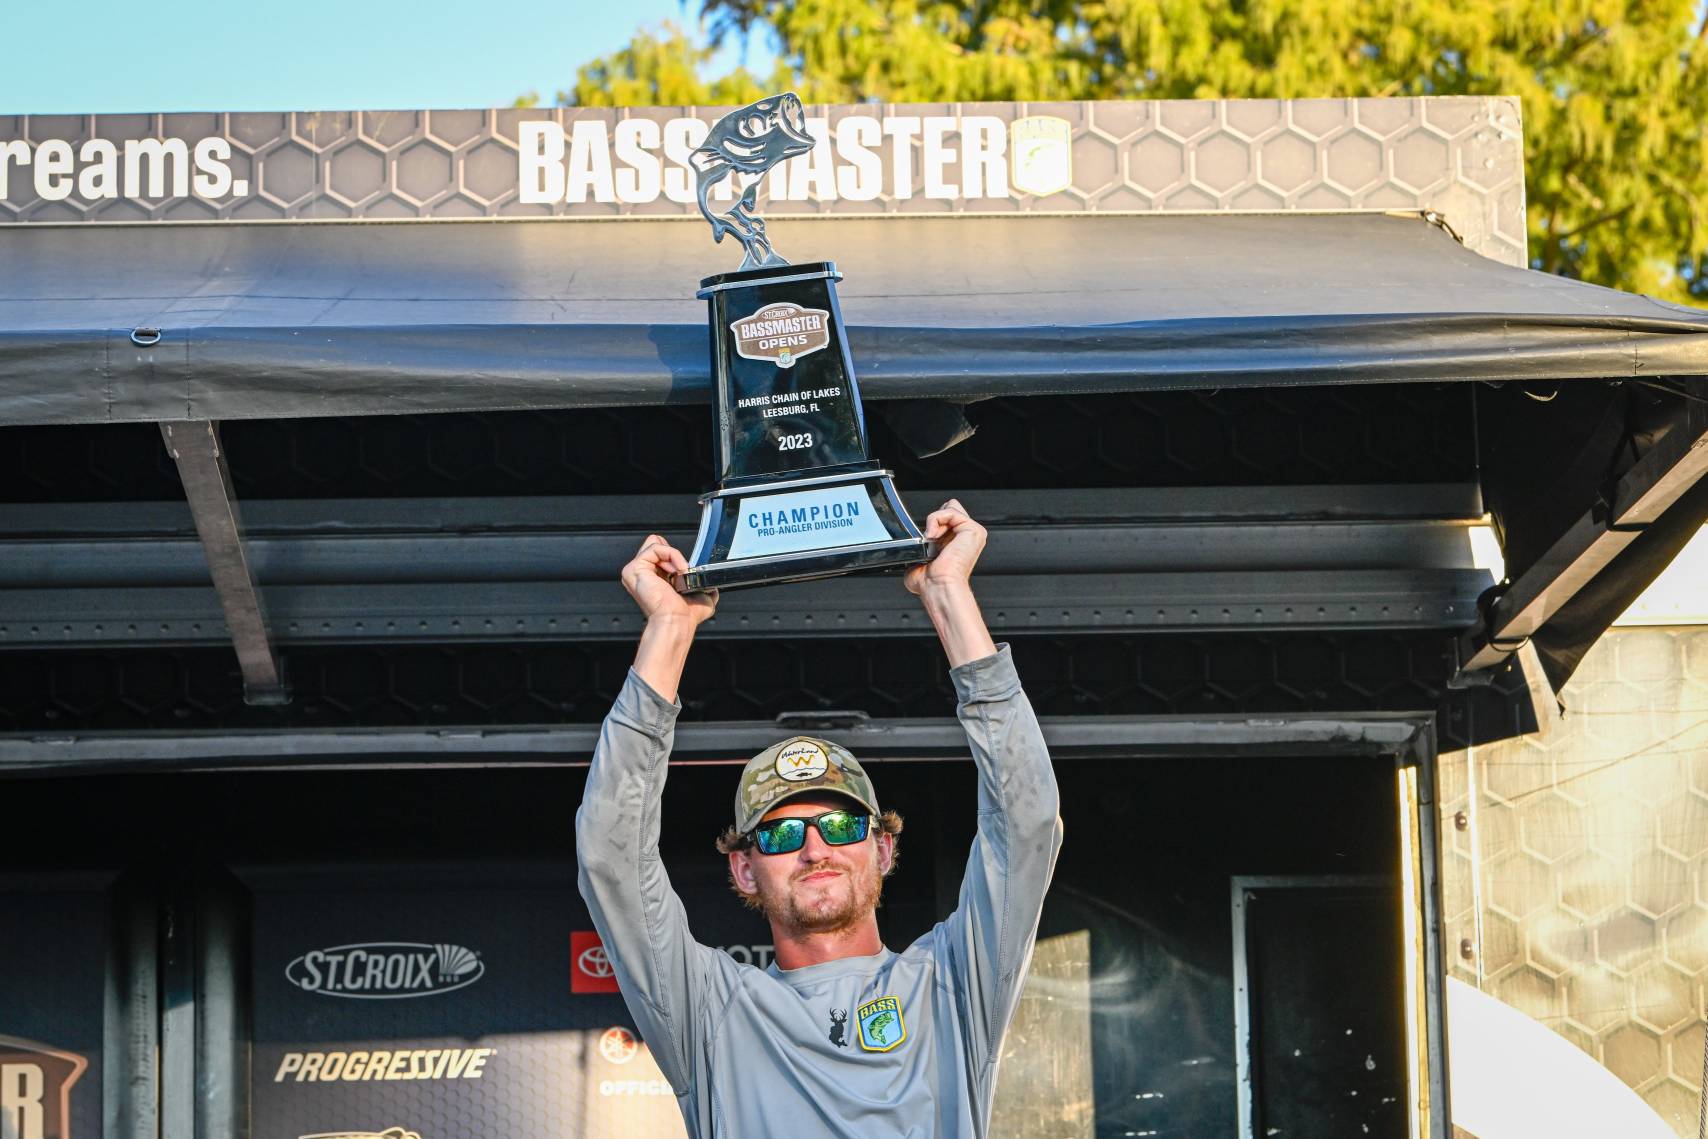 Matt Messer of Warfield, Ky., has won the 2023 St. Croix Bassmaster Open at Harris Chain of Lakes with a two-day total of 39 pounds, 13 ounces.